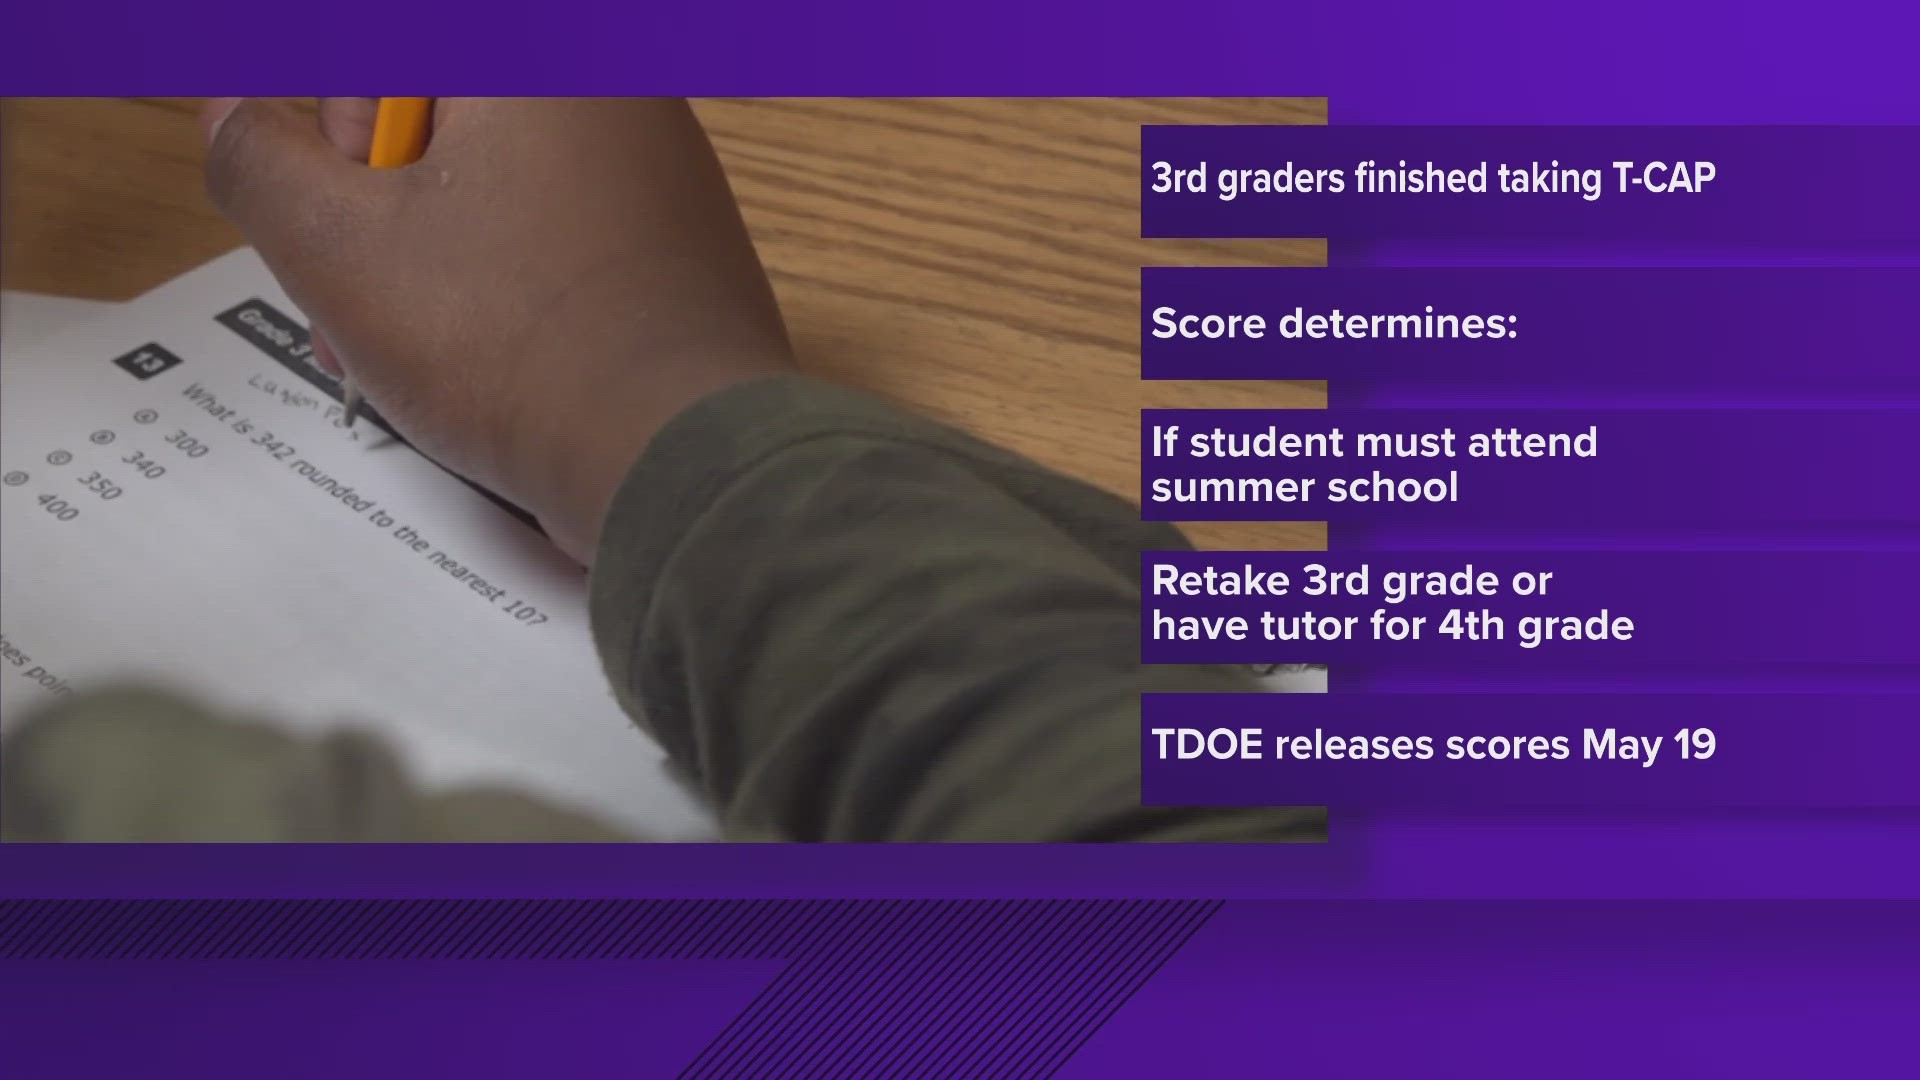 The department of education plans to release raw scores to the districts May 19, but then it’s up to the district on when they release those scores to families.